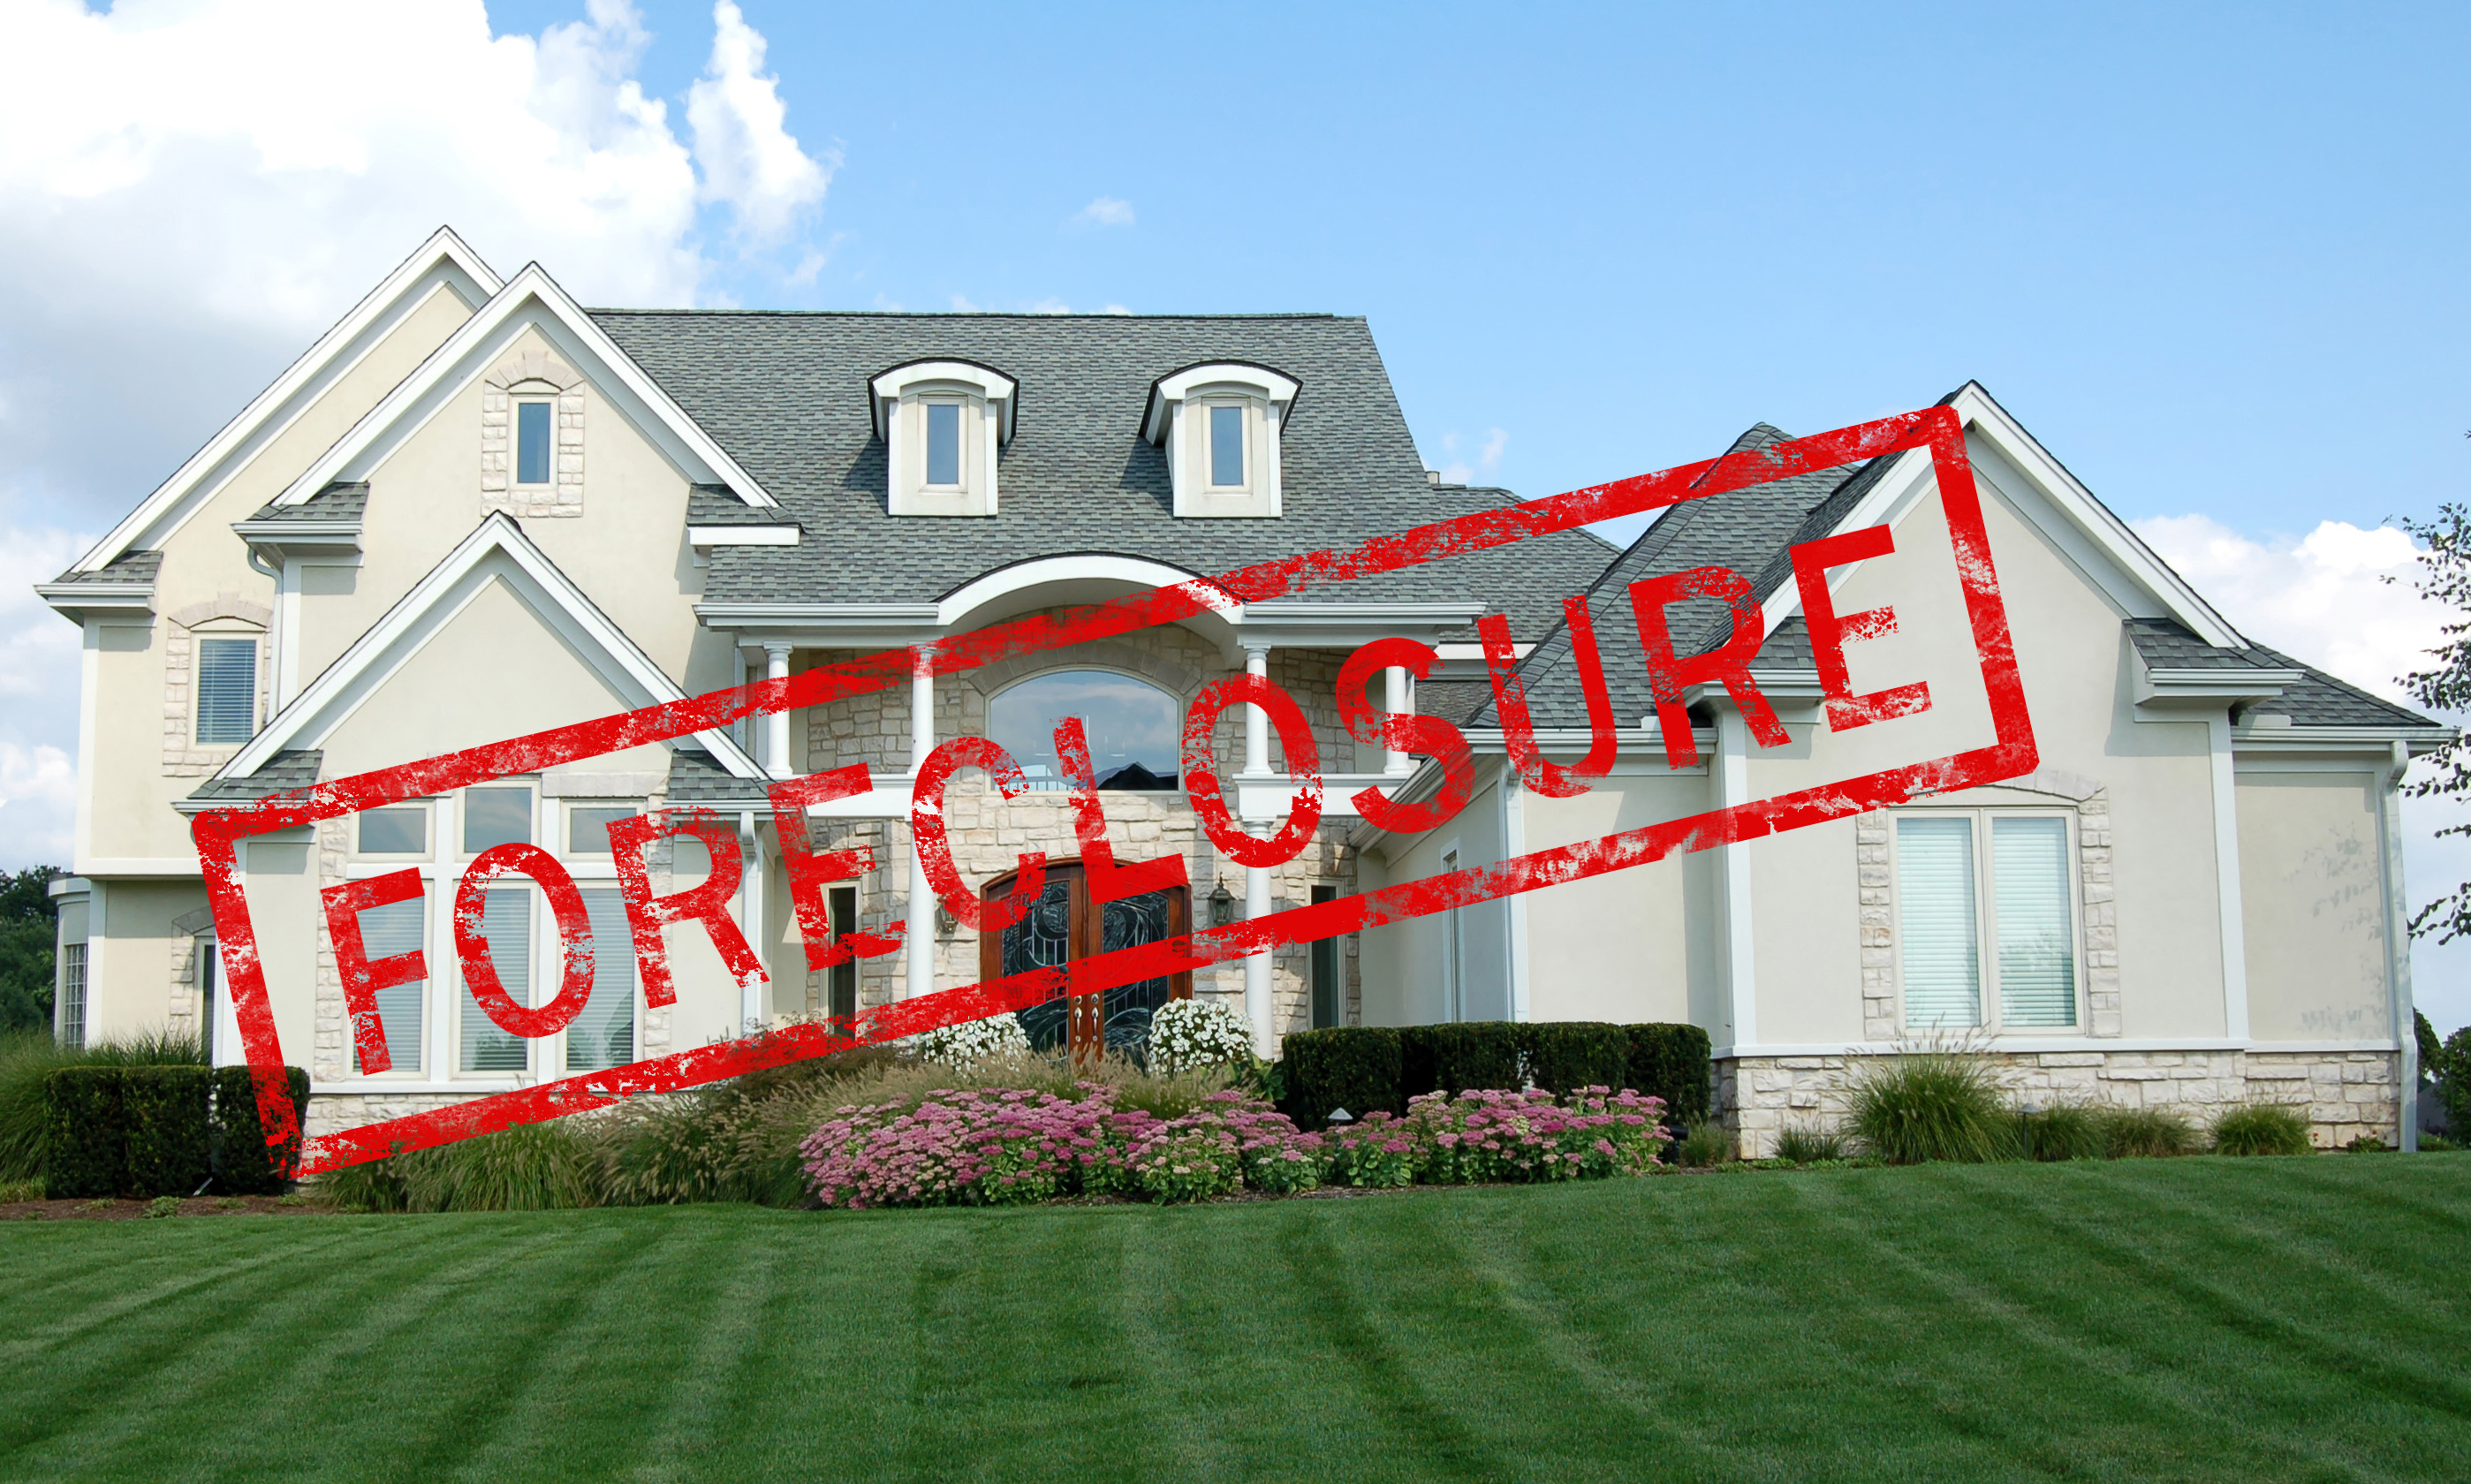 Call  to discuss appraisals on Saint Johns foreclosures